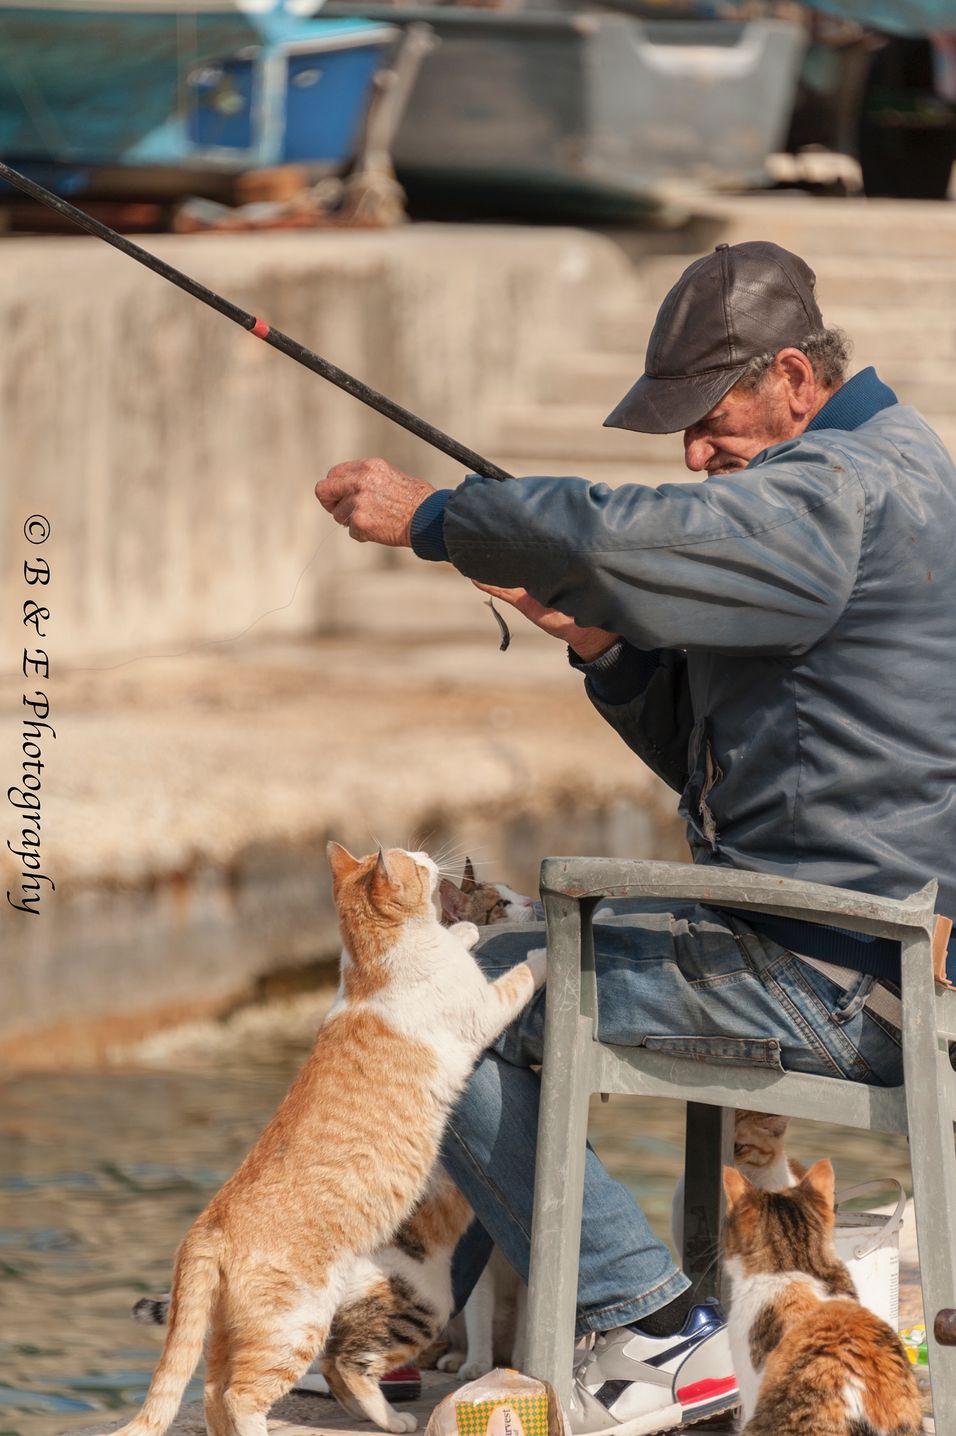 Fishing for lunch with a cat eagerly awaiting fresh fish.